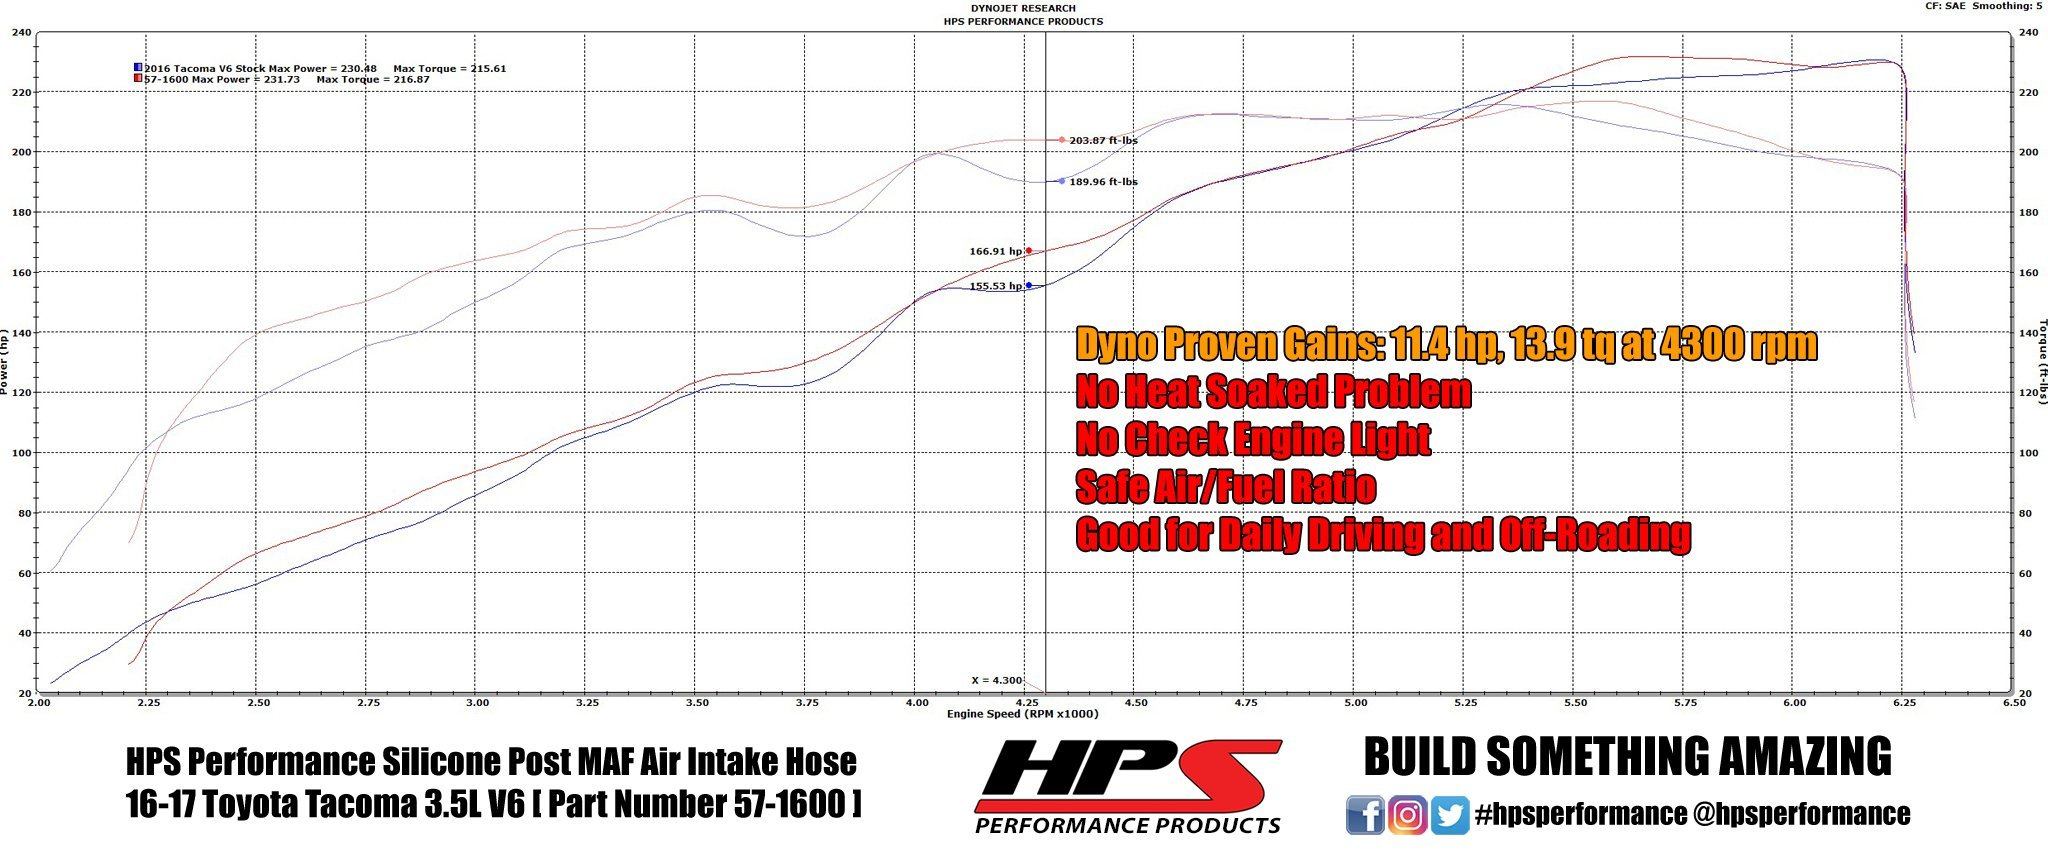 '16-20 Toyota Tacoma Reinforced Post MAF Air Intake Hose Kit Performance Products HPS Performance (power chart)